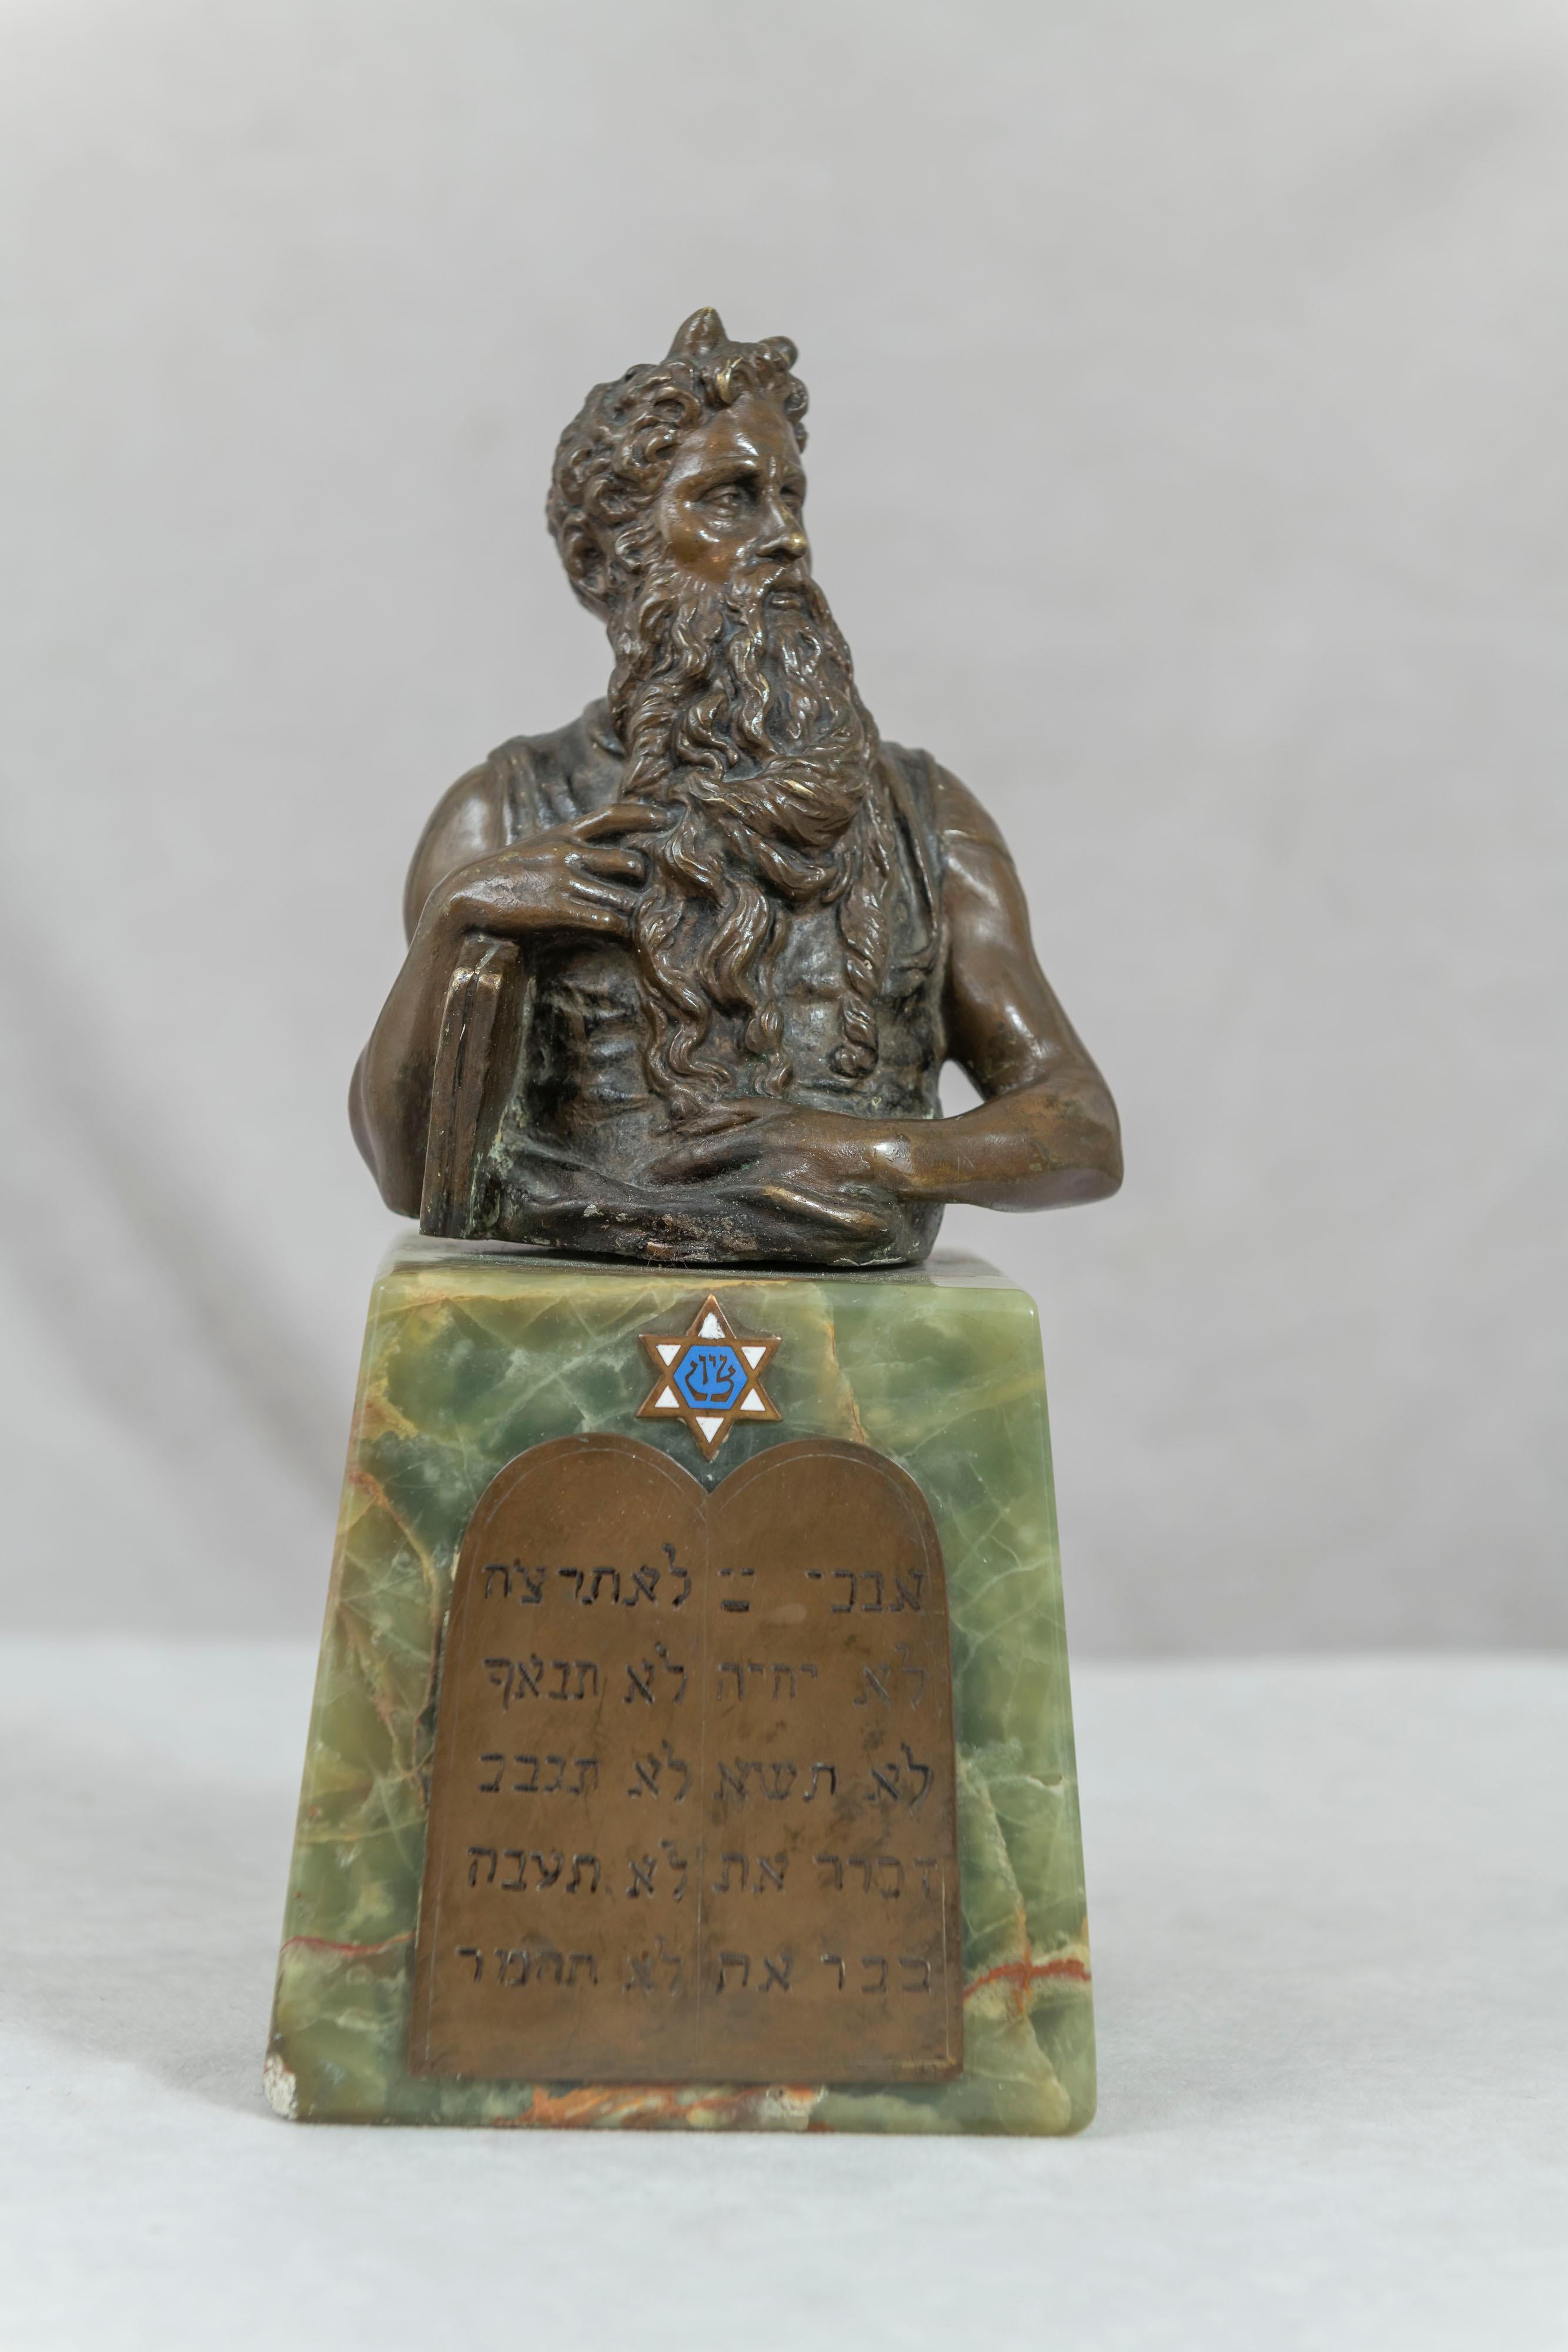 Early 20th Century Antique Bronze Bust of Moses Mounted on Onyx with Plaque of 10 Commandments